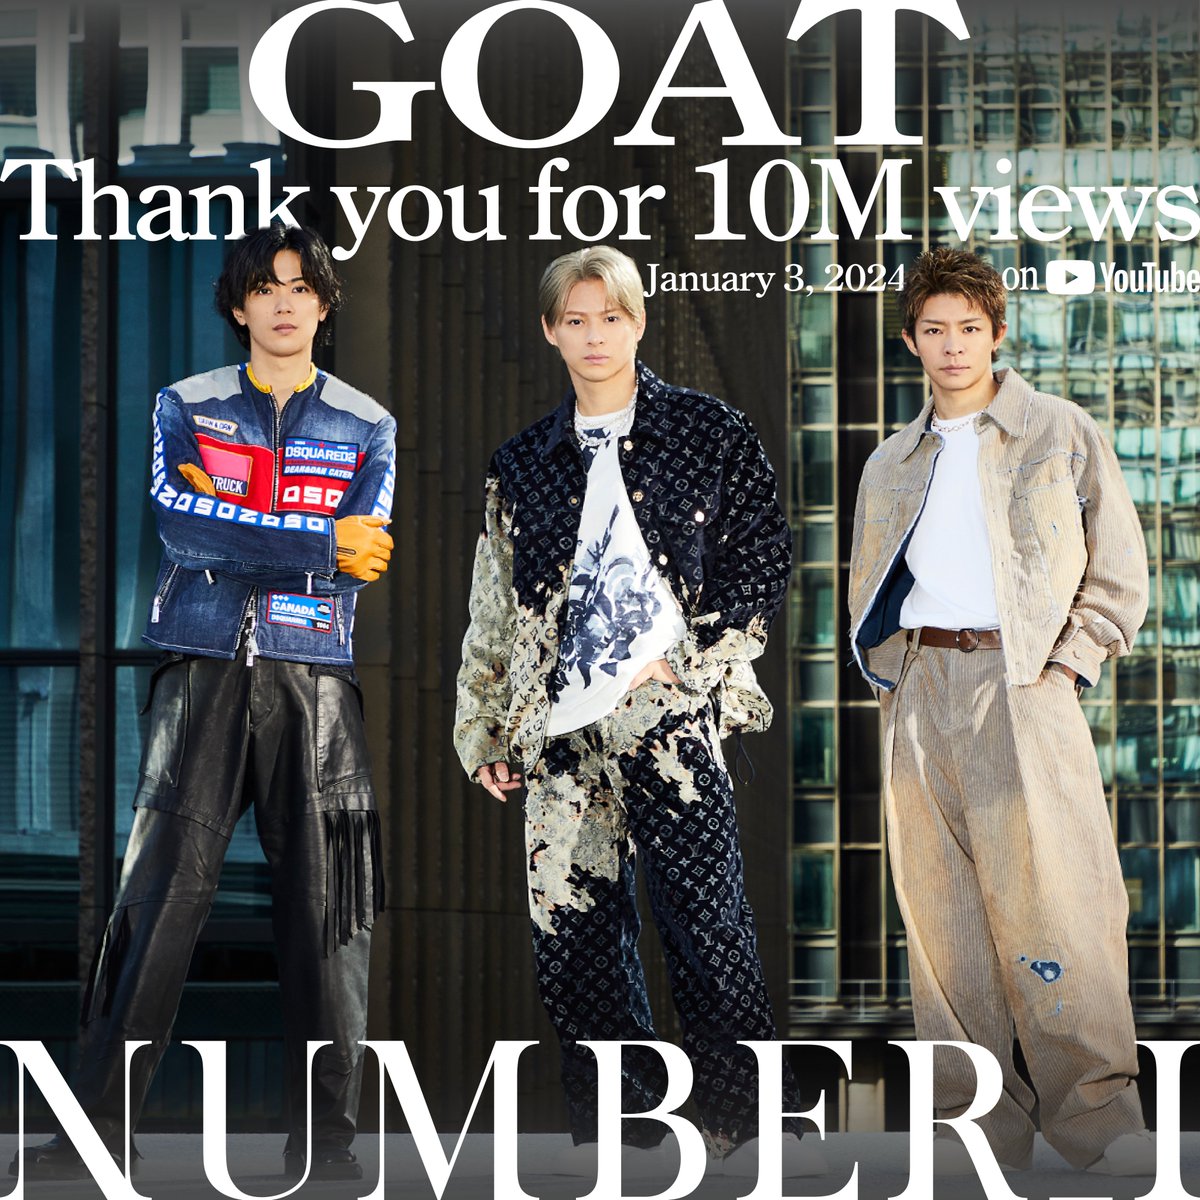 🐐🐐🐐

Thank you all for watching
Number_i - GOAT (Official Music Video)
▶youtu.be/dcGu-yn06c4

#Number_i_GOAT